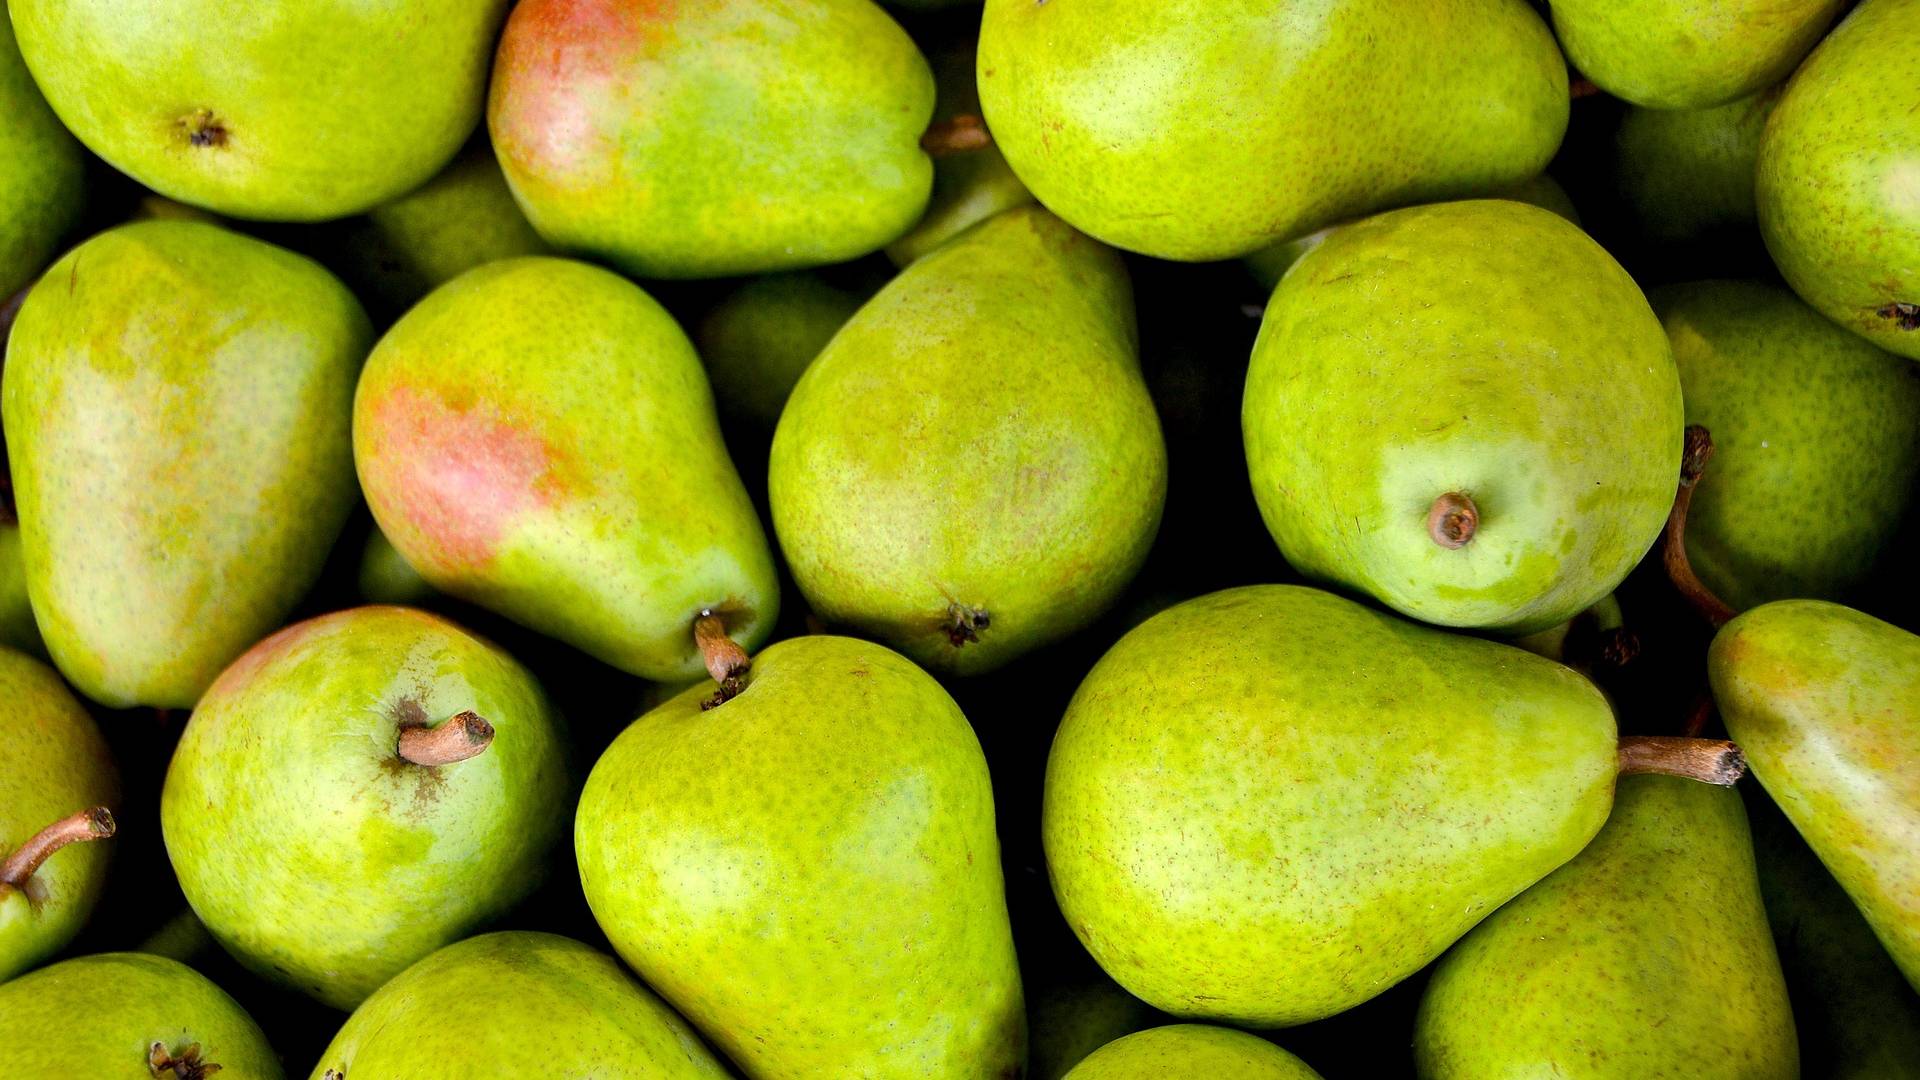 actel_pears_background